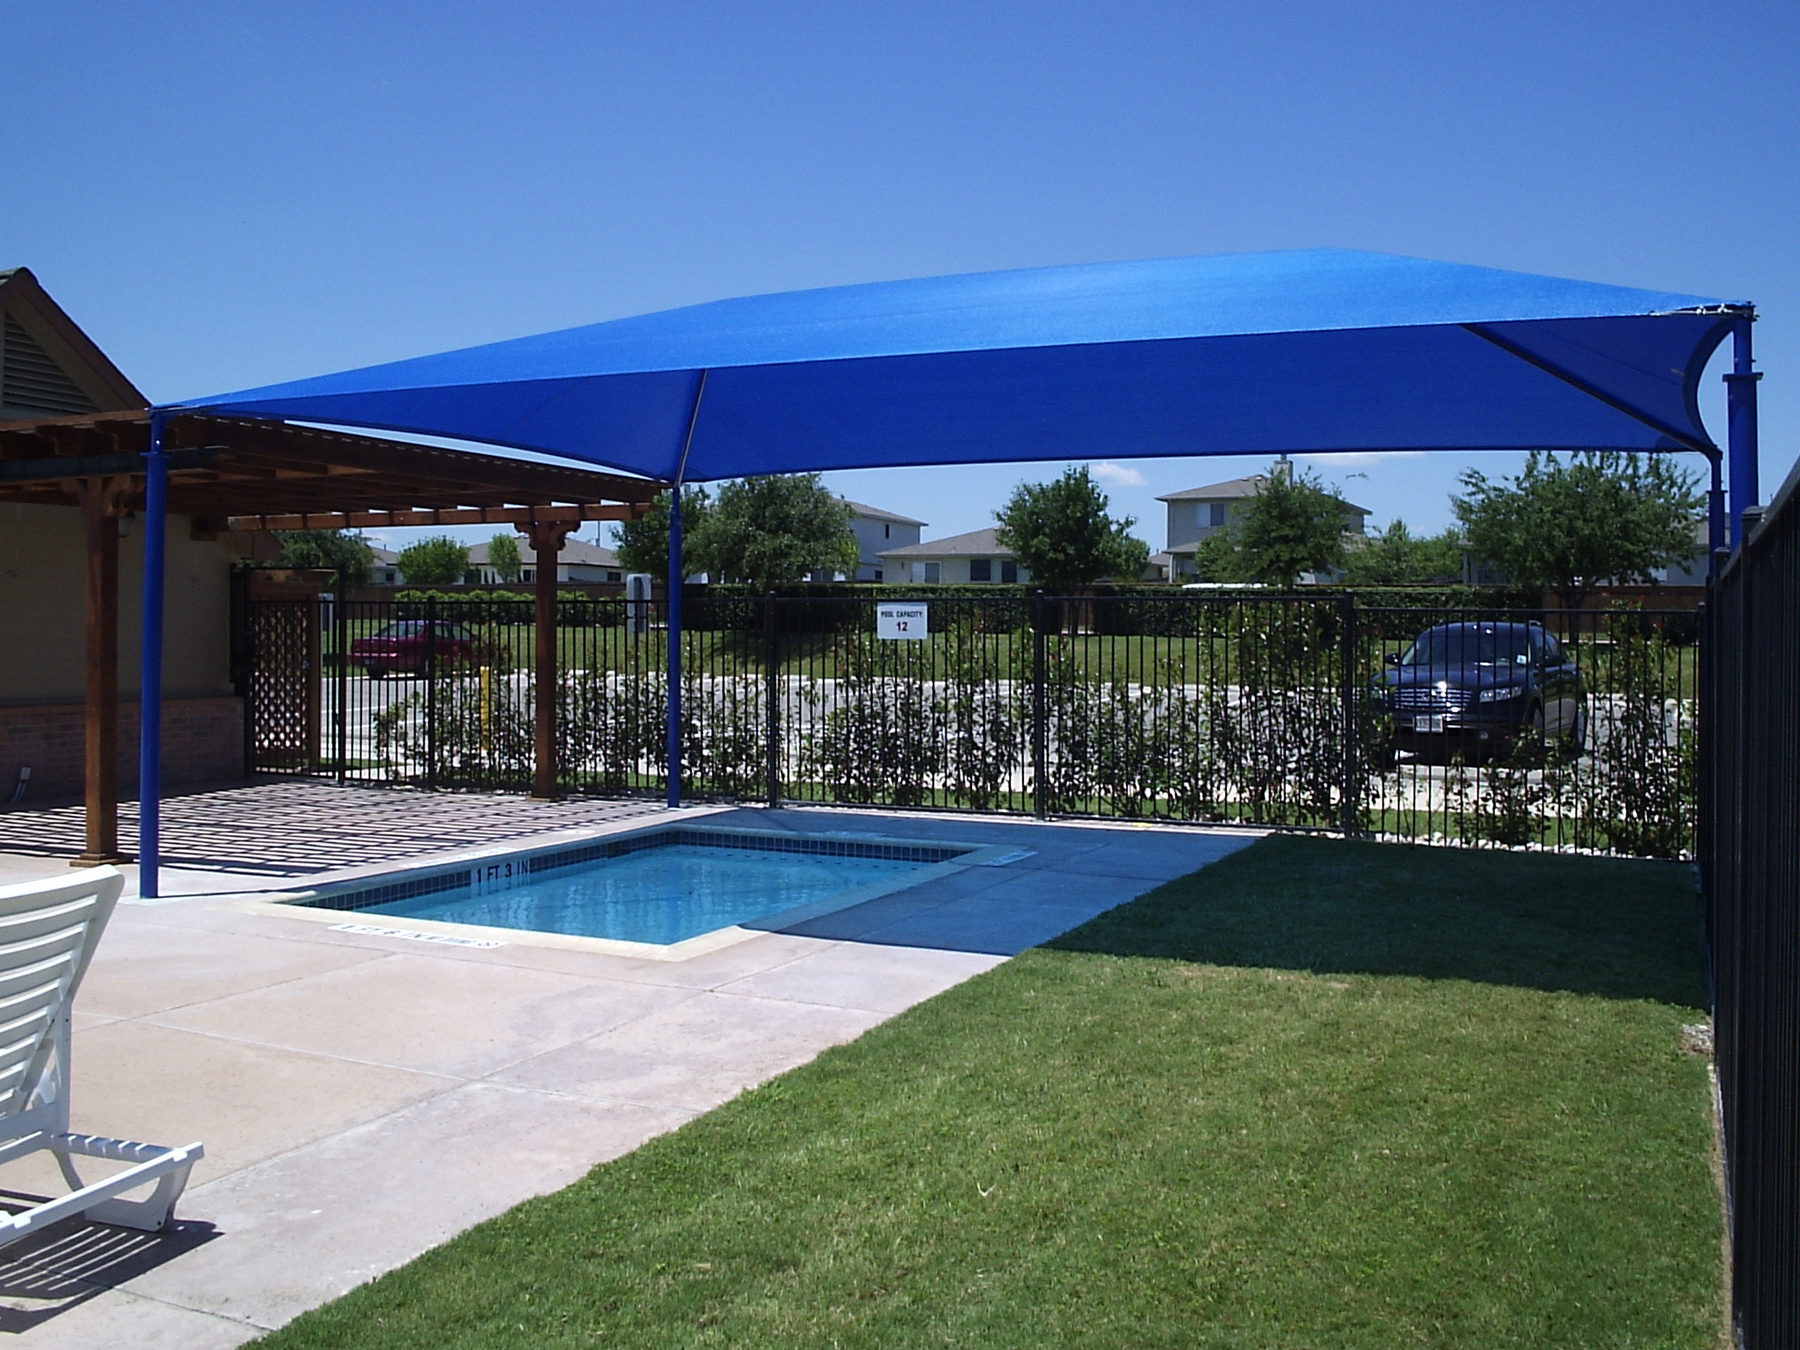 blue shade covering outdoor pool